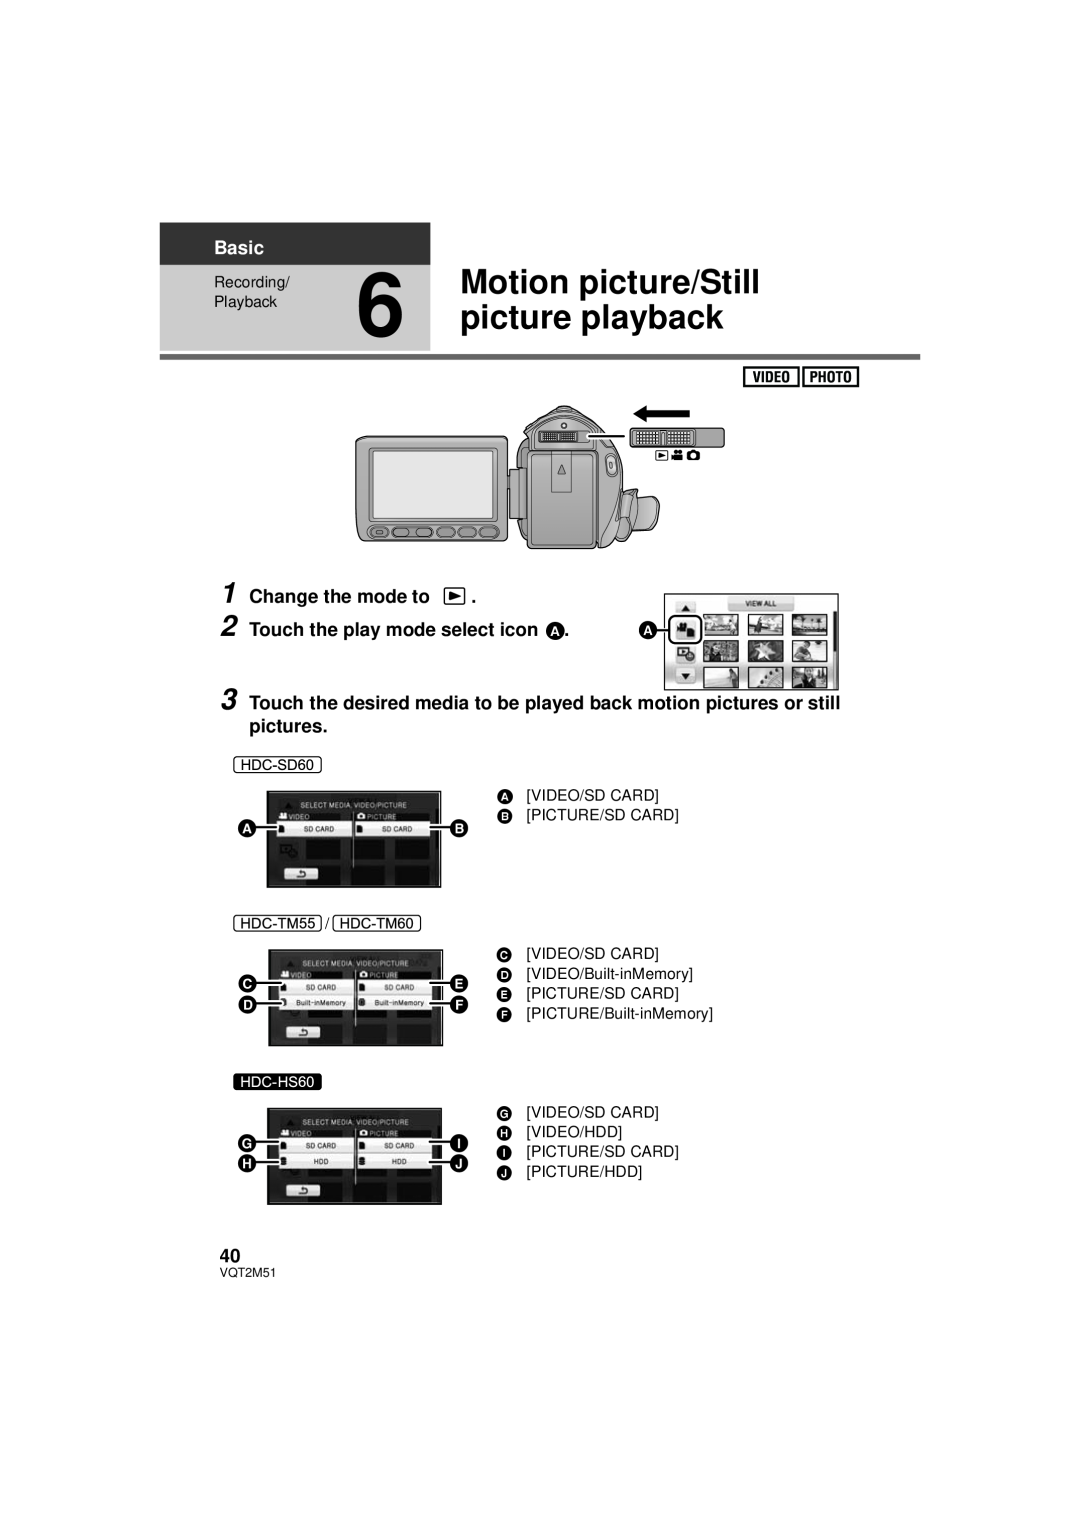 Panasonic HDC-SD60P/PC Motion picture/Still, picture playback, Change the mode to, Touch the play mode select icon A,  H 